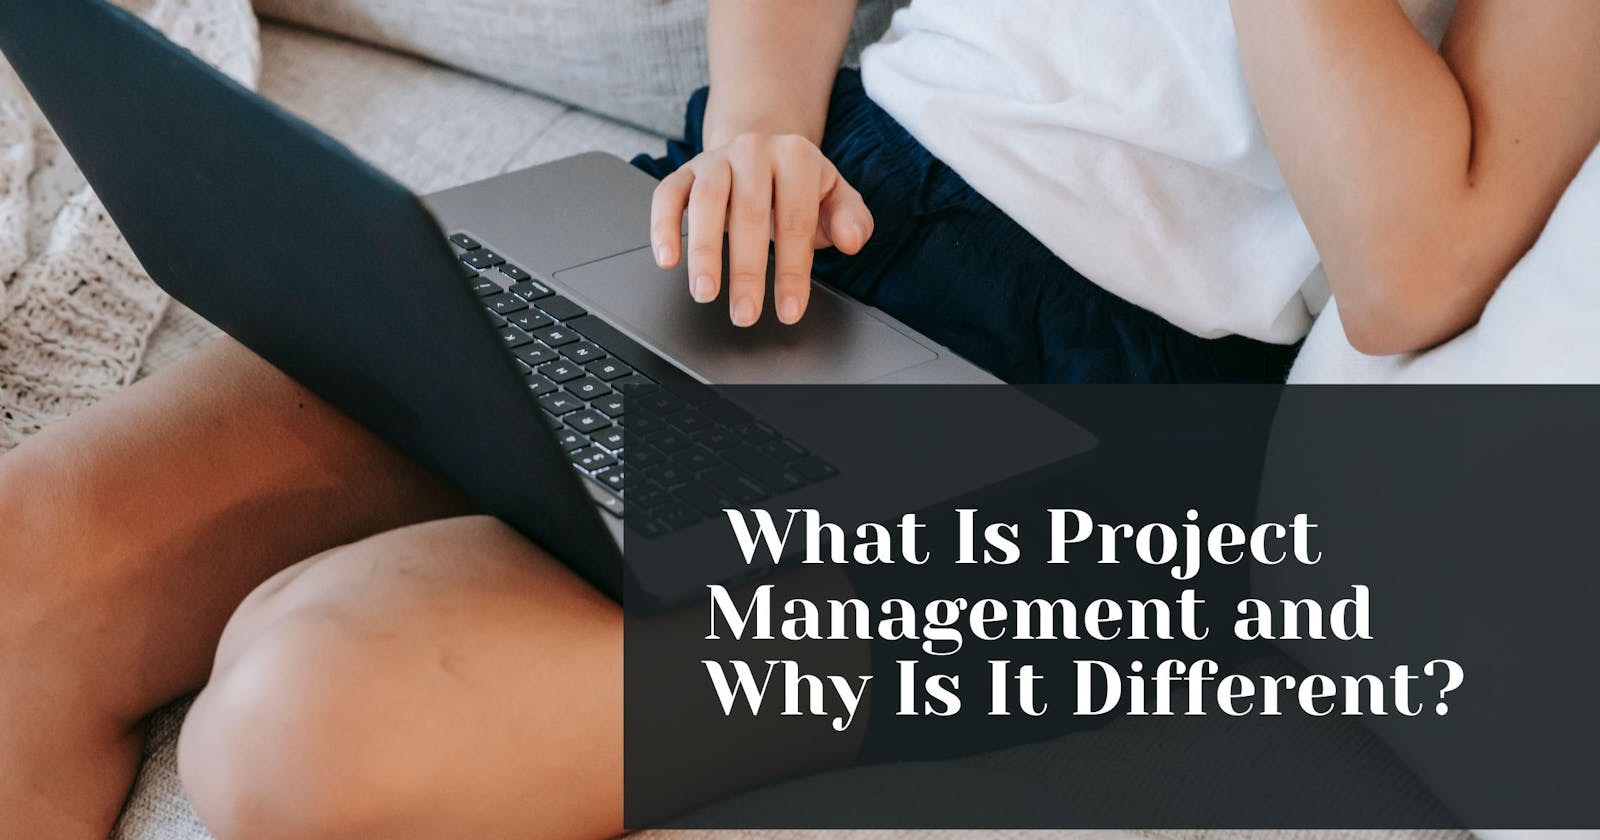 Quang Regan – What Is Project Management and Why Is It Different